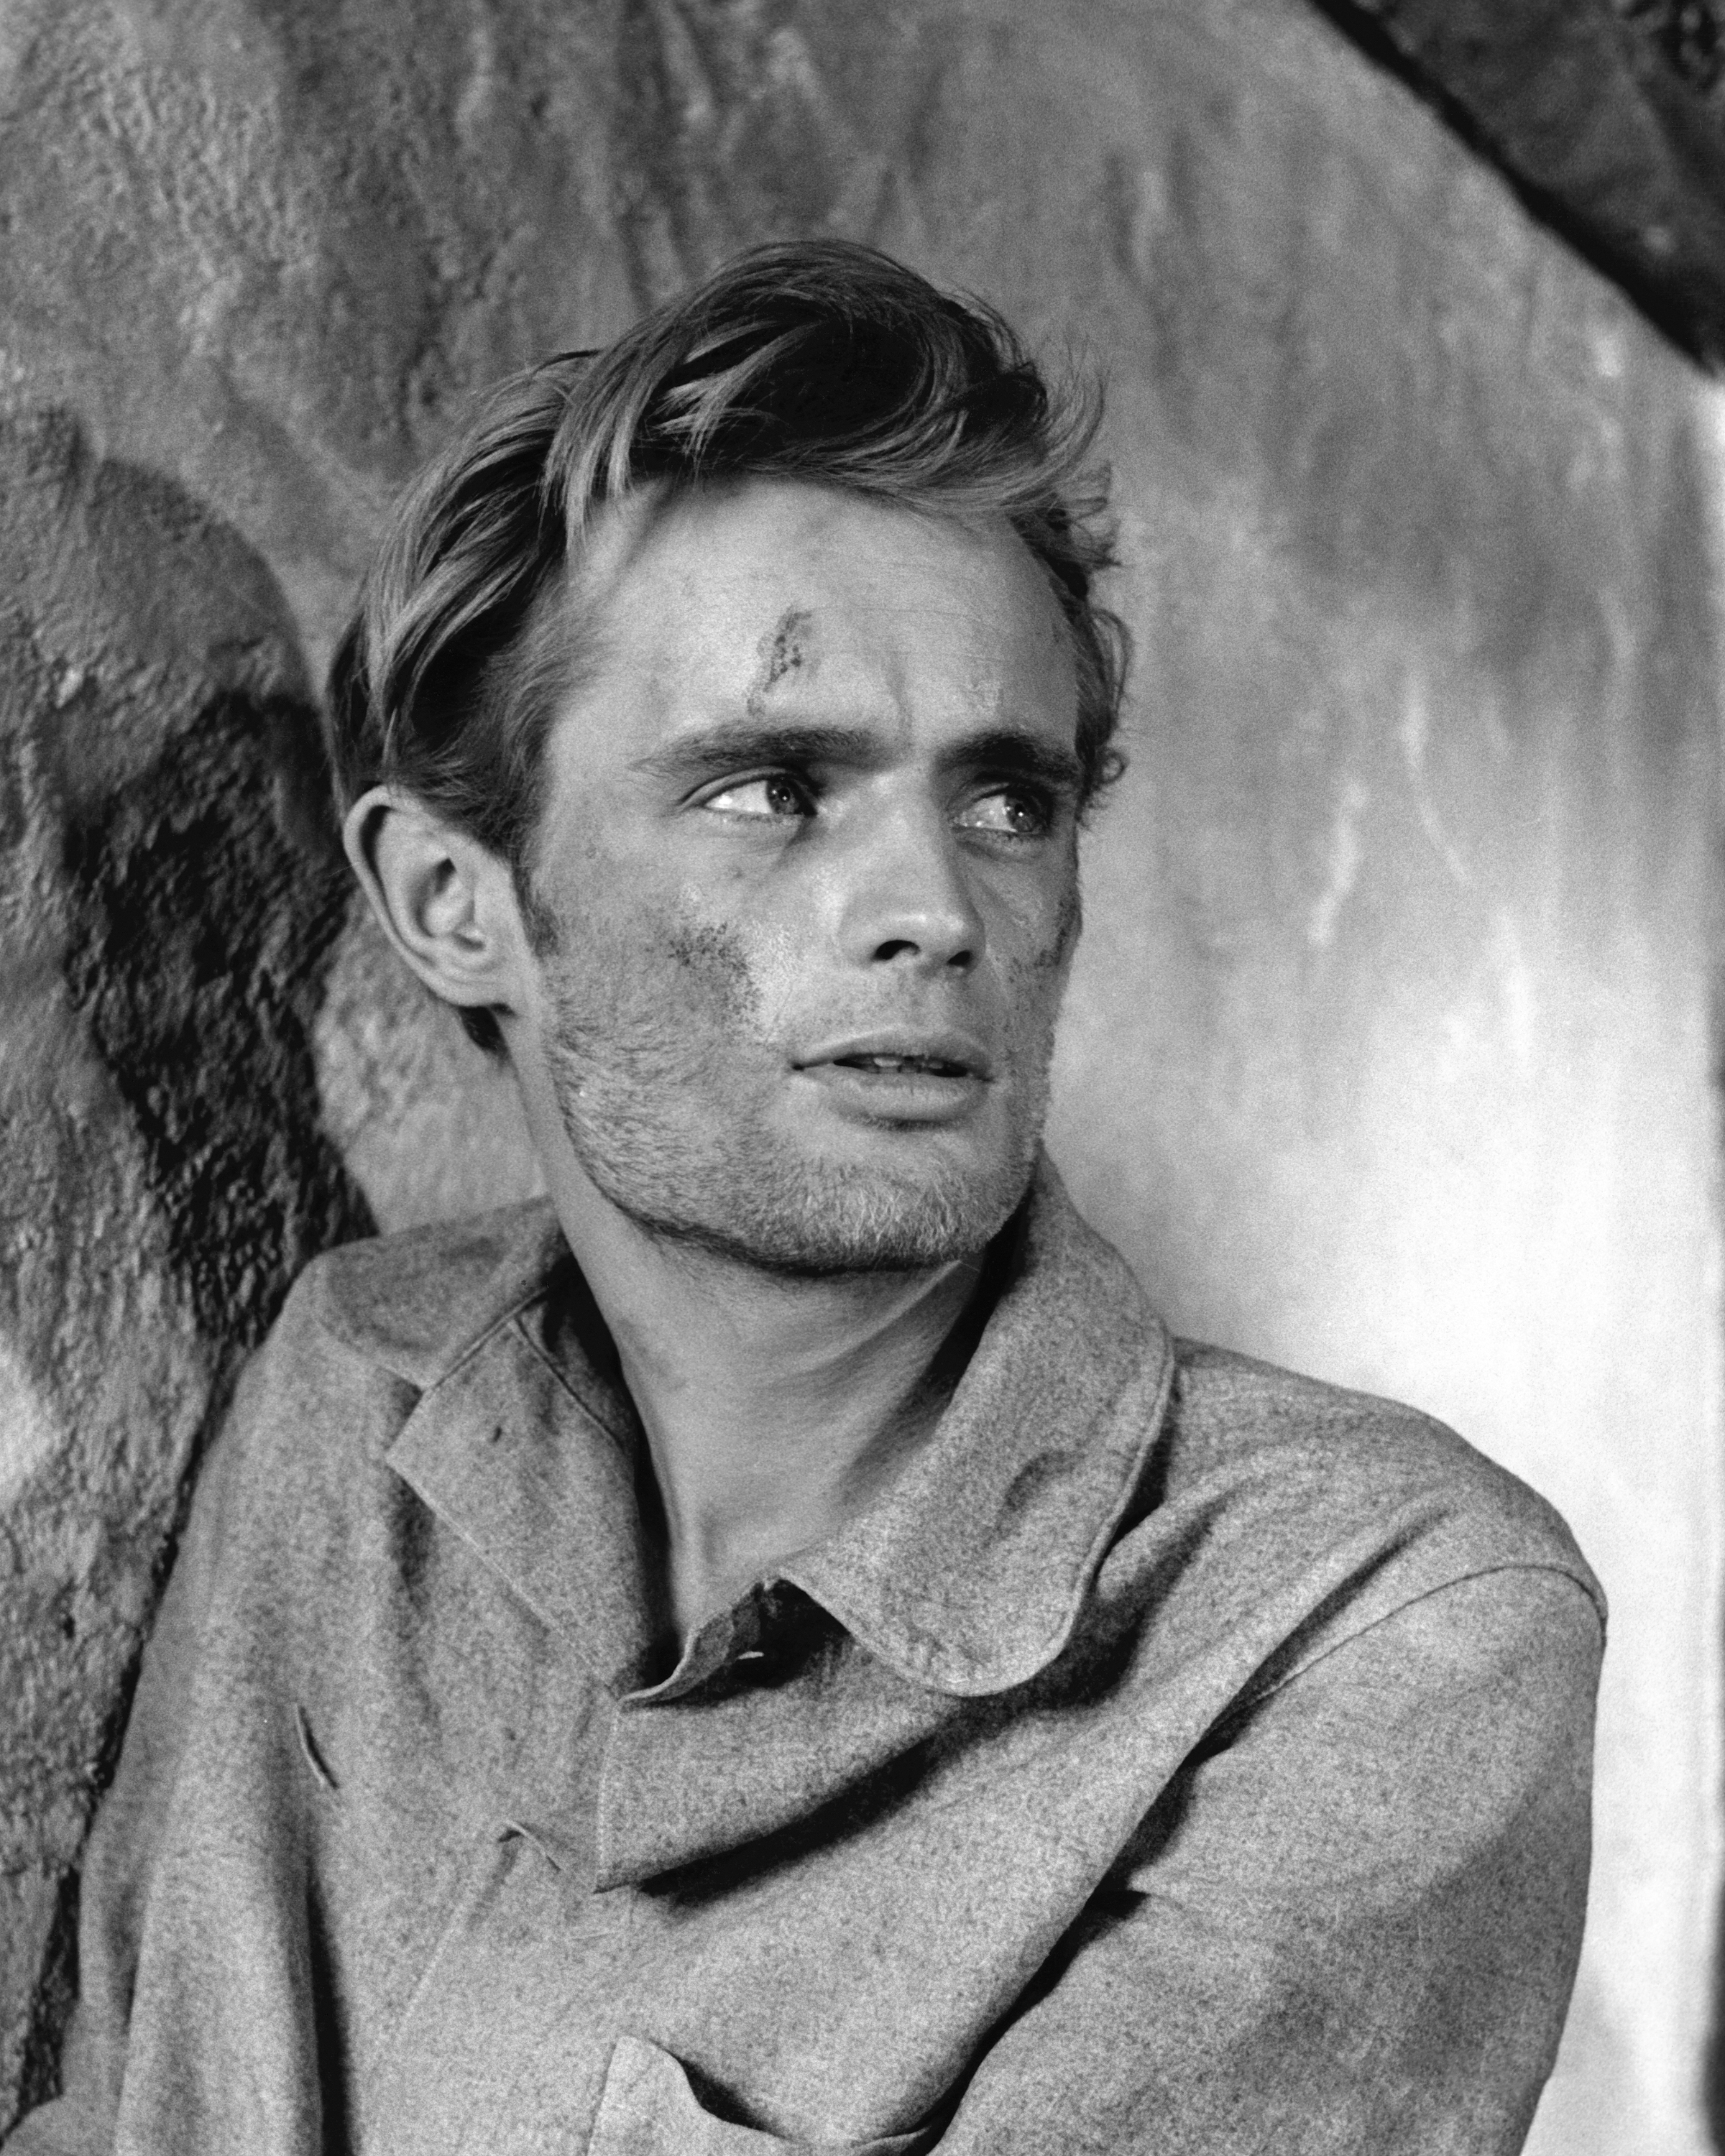 David McCallum in "Robbery Under Arms" in 1957 | Source: Getty Images